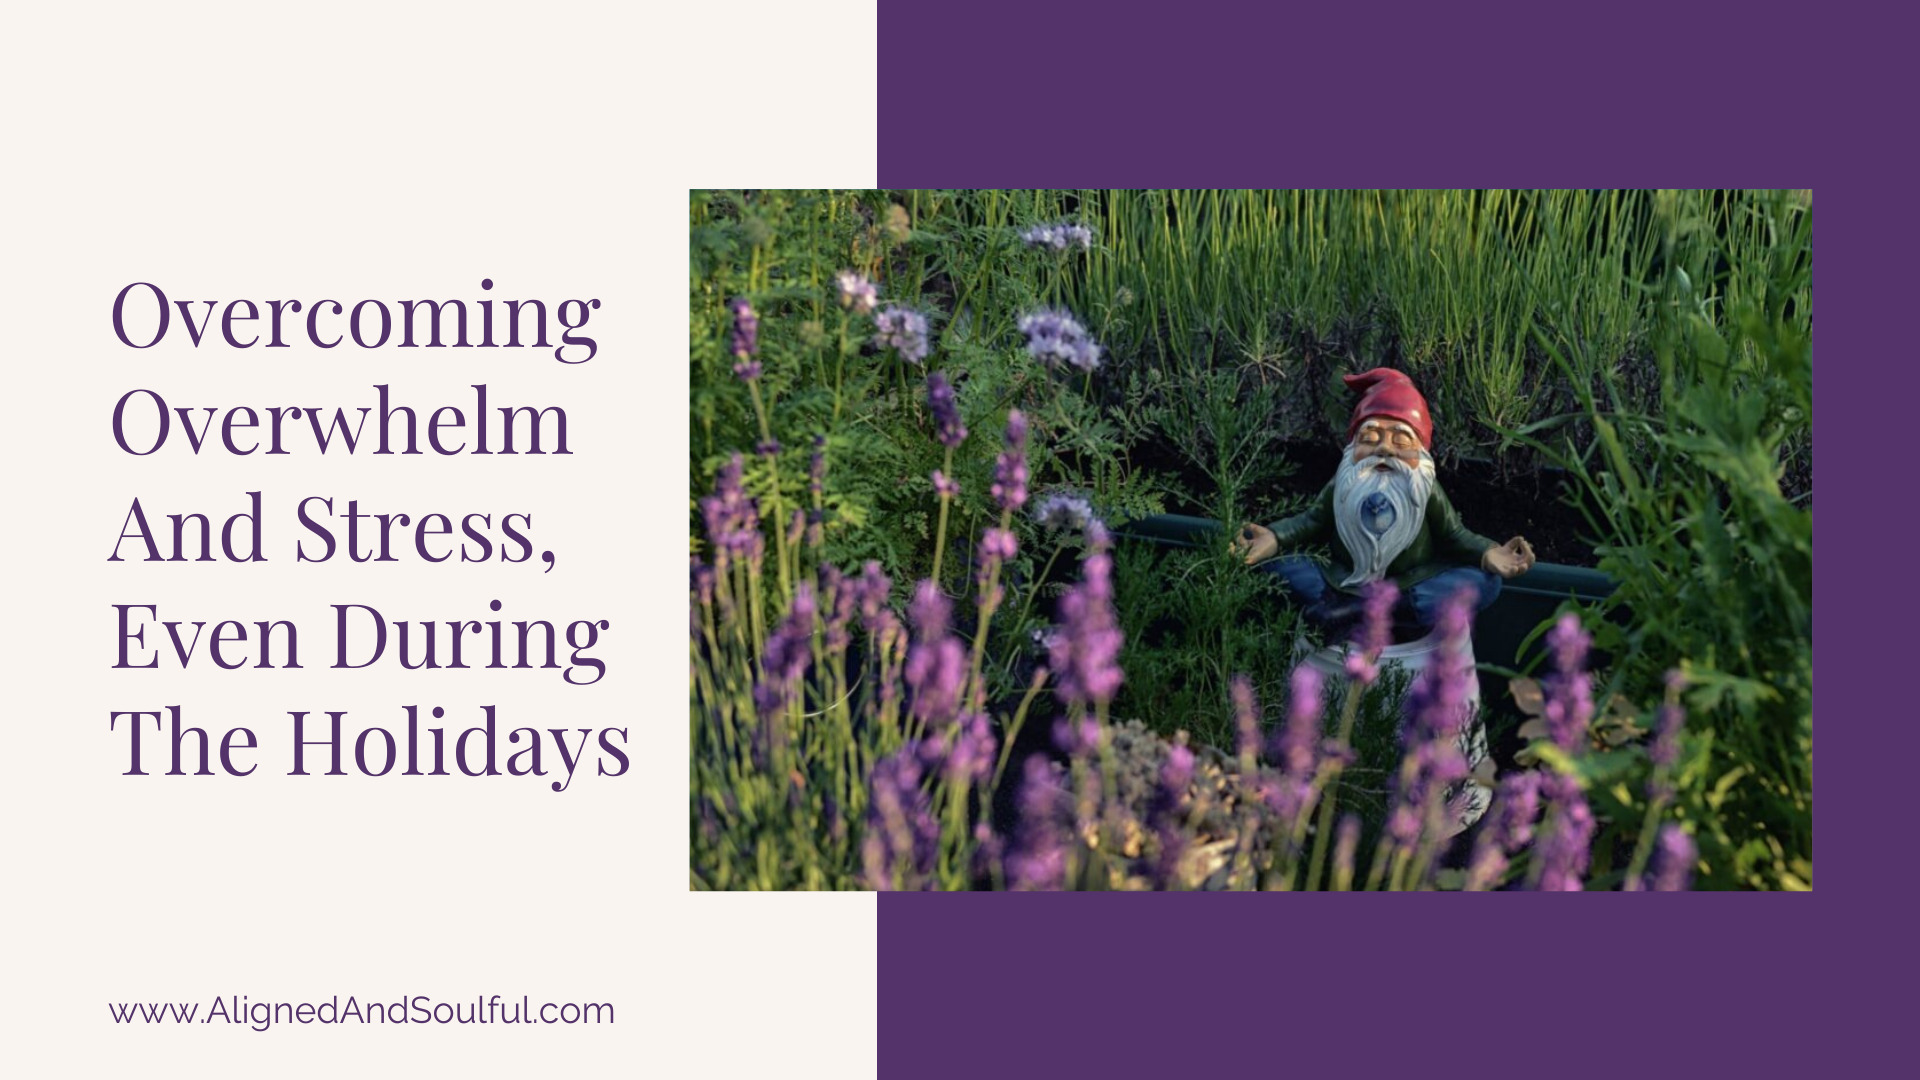 Overcoming Overwhelm and Stress, Even During the Holidays